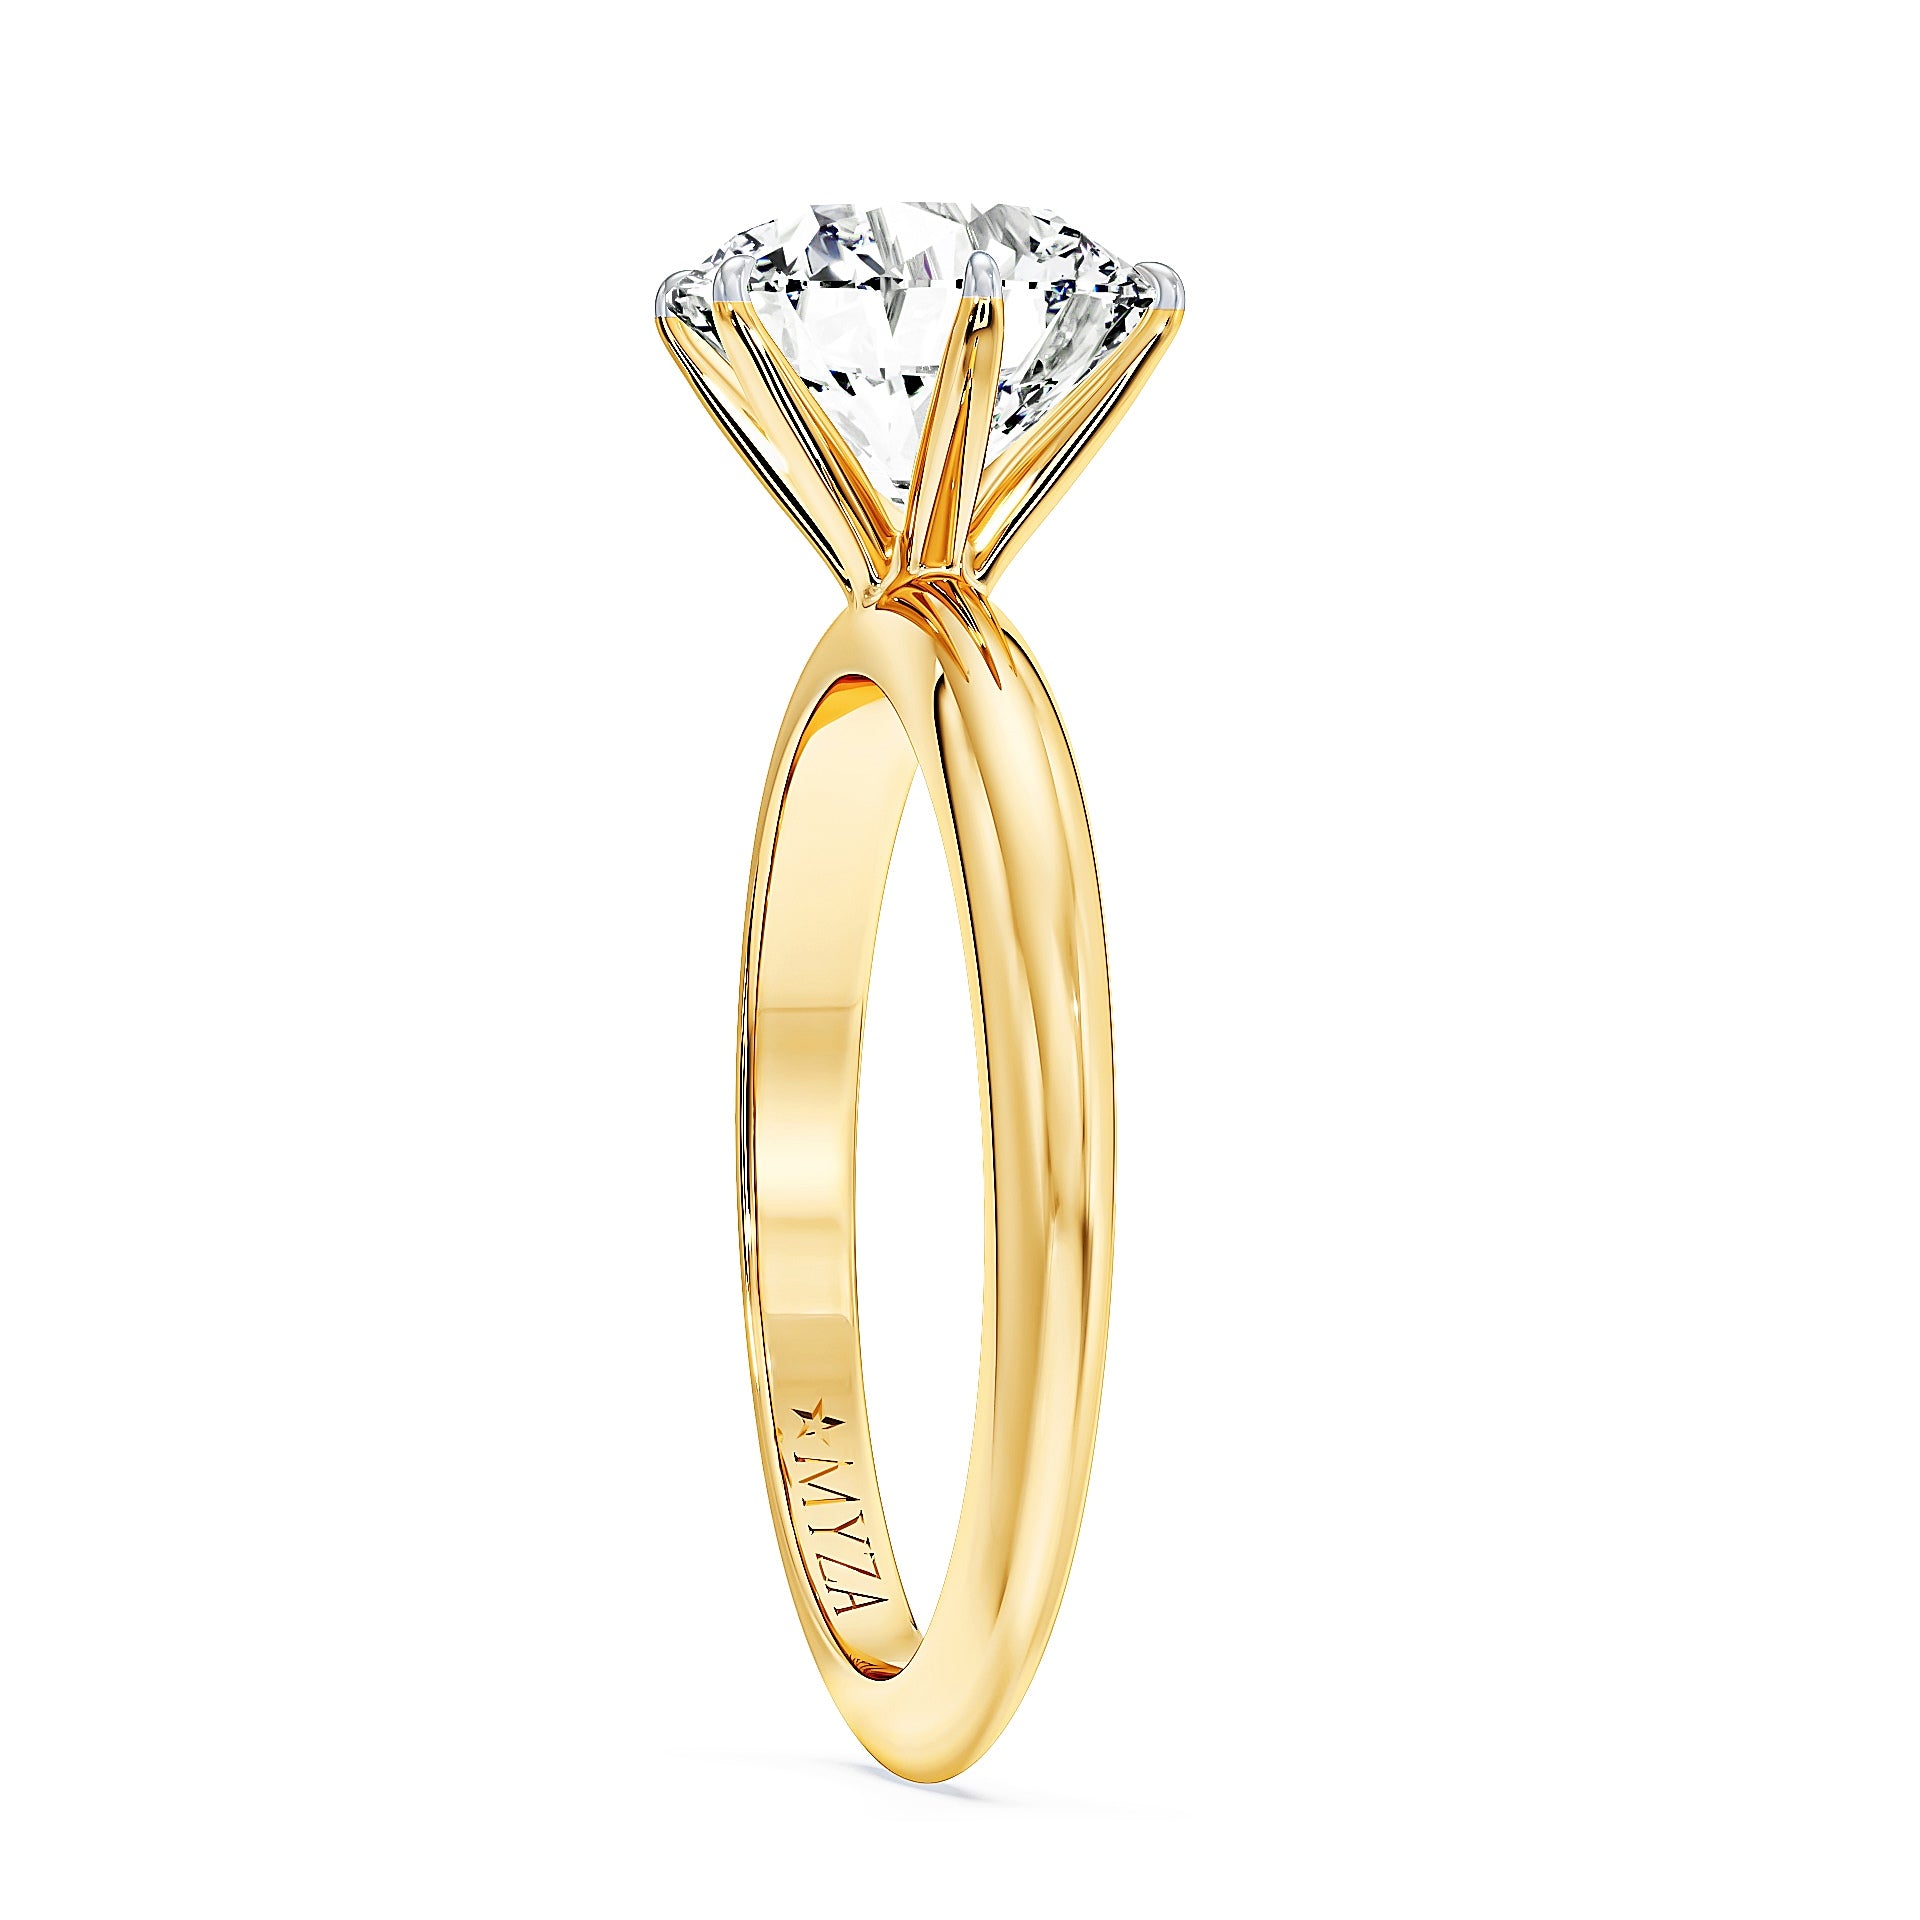 Side view of MYZA 2 carats IGI certified lab-grown diamond ring in 18kt hallmark gold for women. ISO and BIS certification ensure quality. Ideal for those seeking certified diamond rings online.